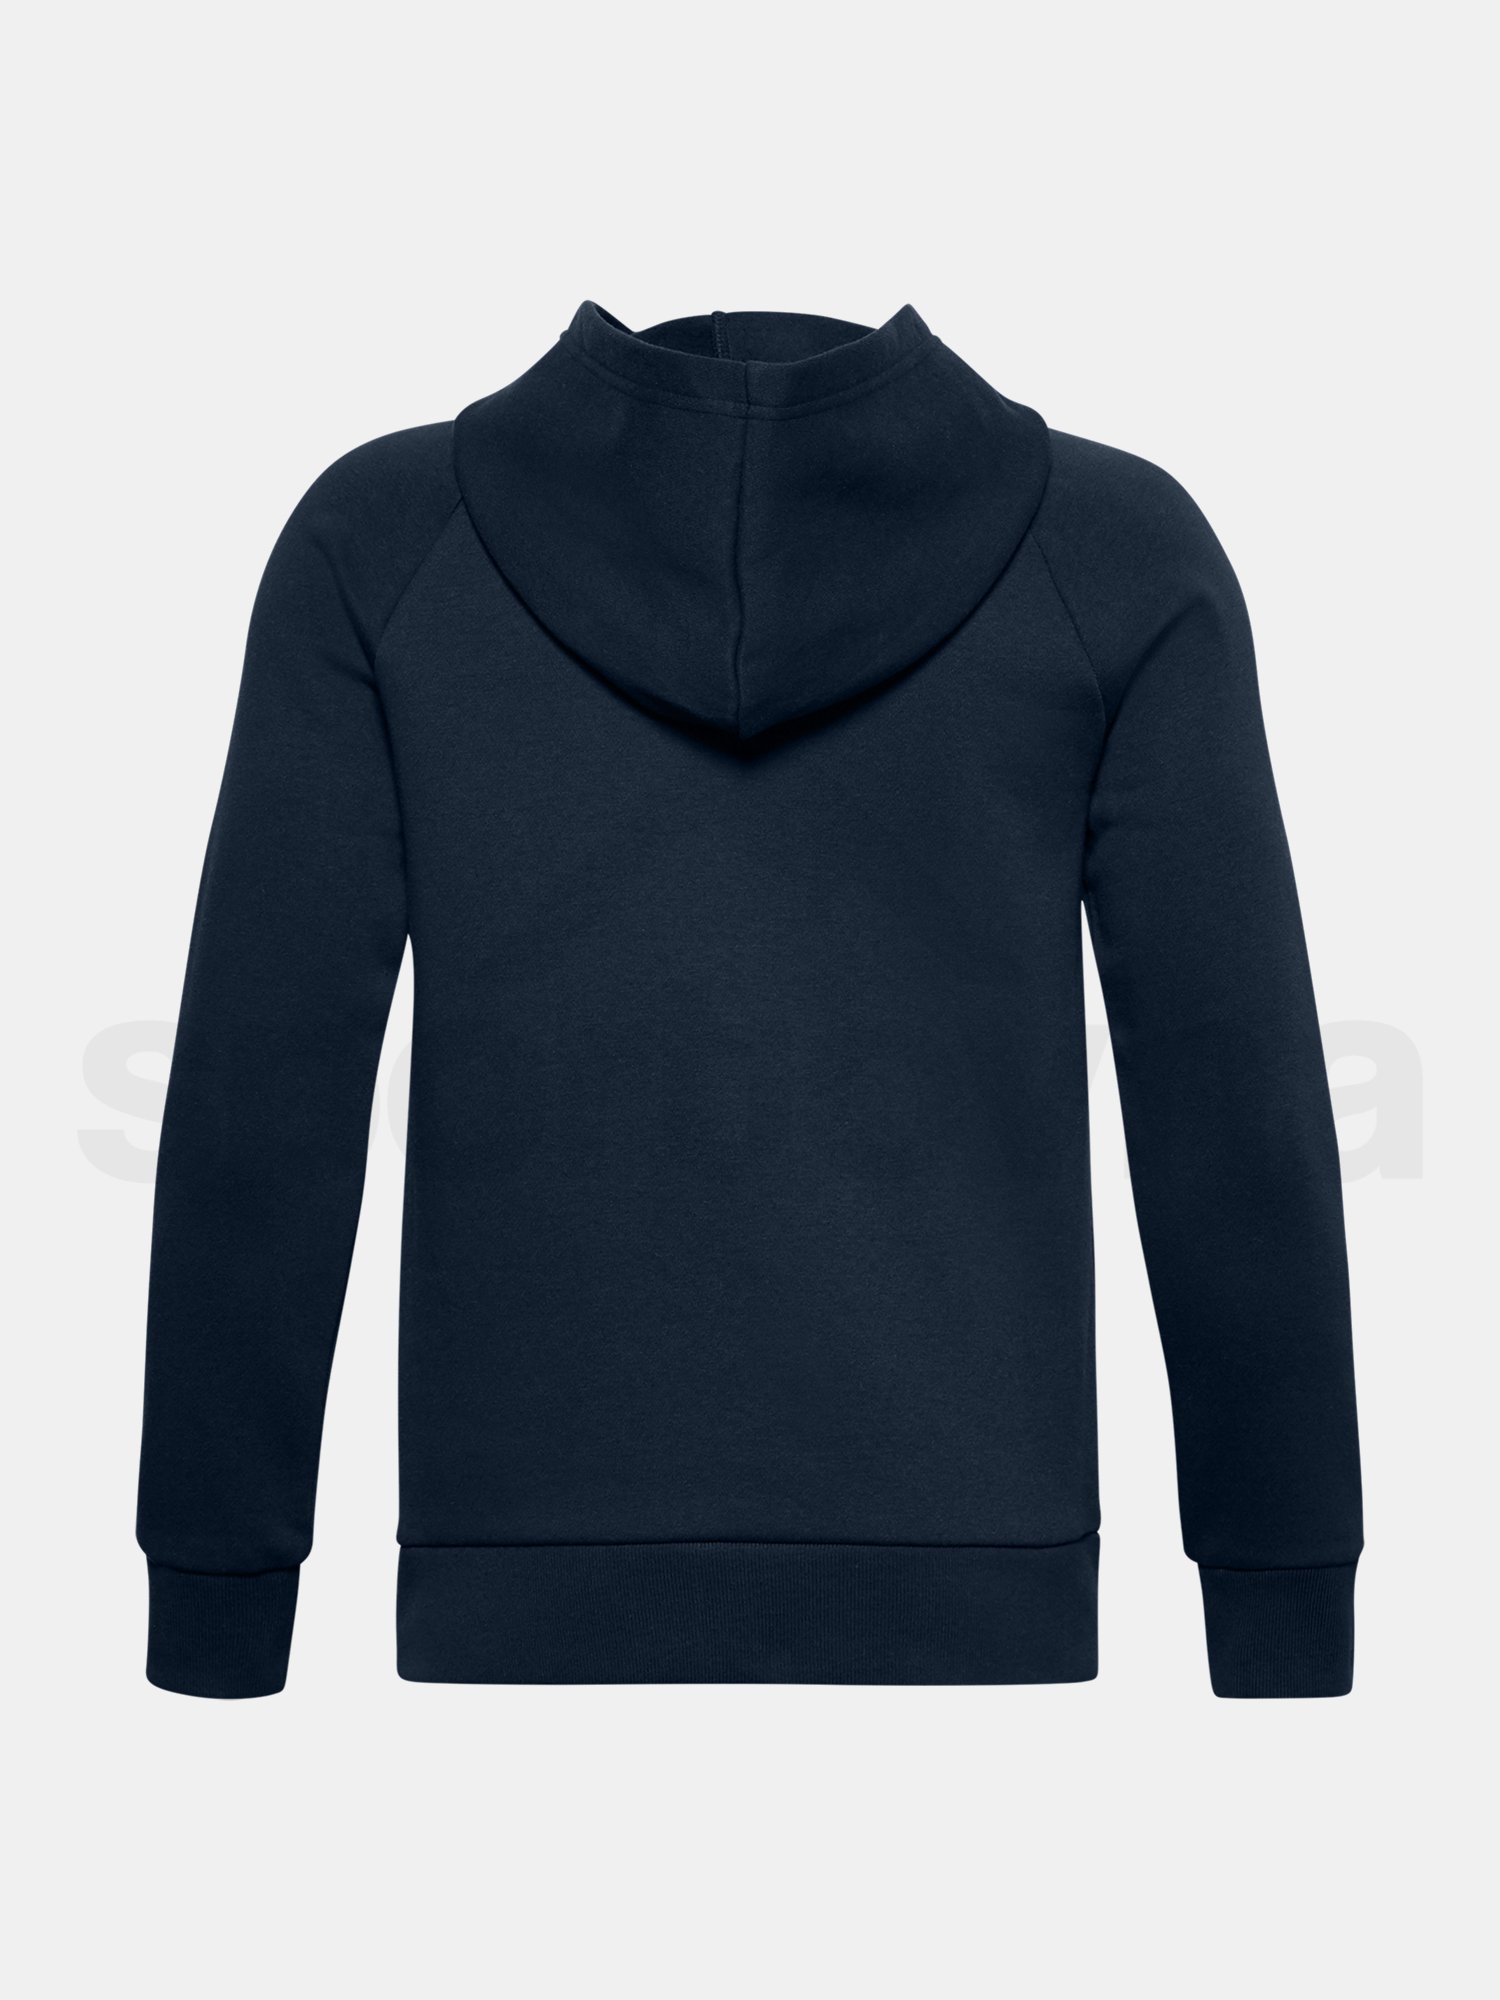 Mikina Under Armour RIVAL COTTON HOODIE